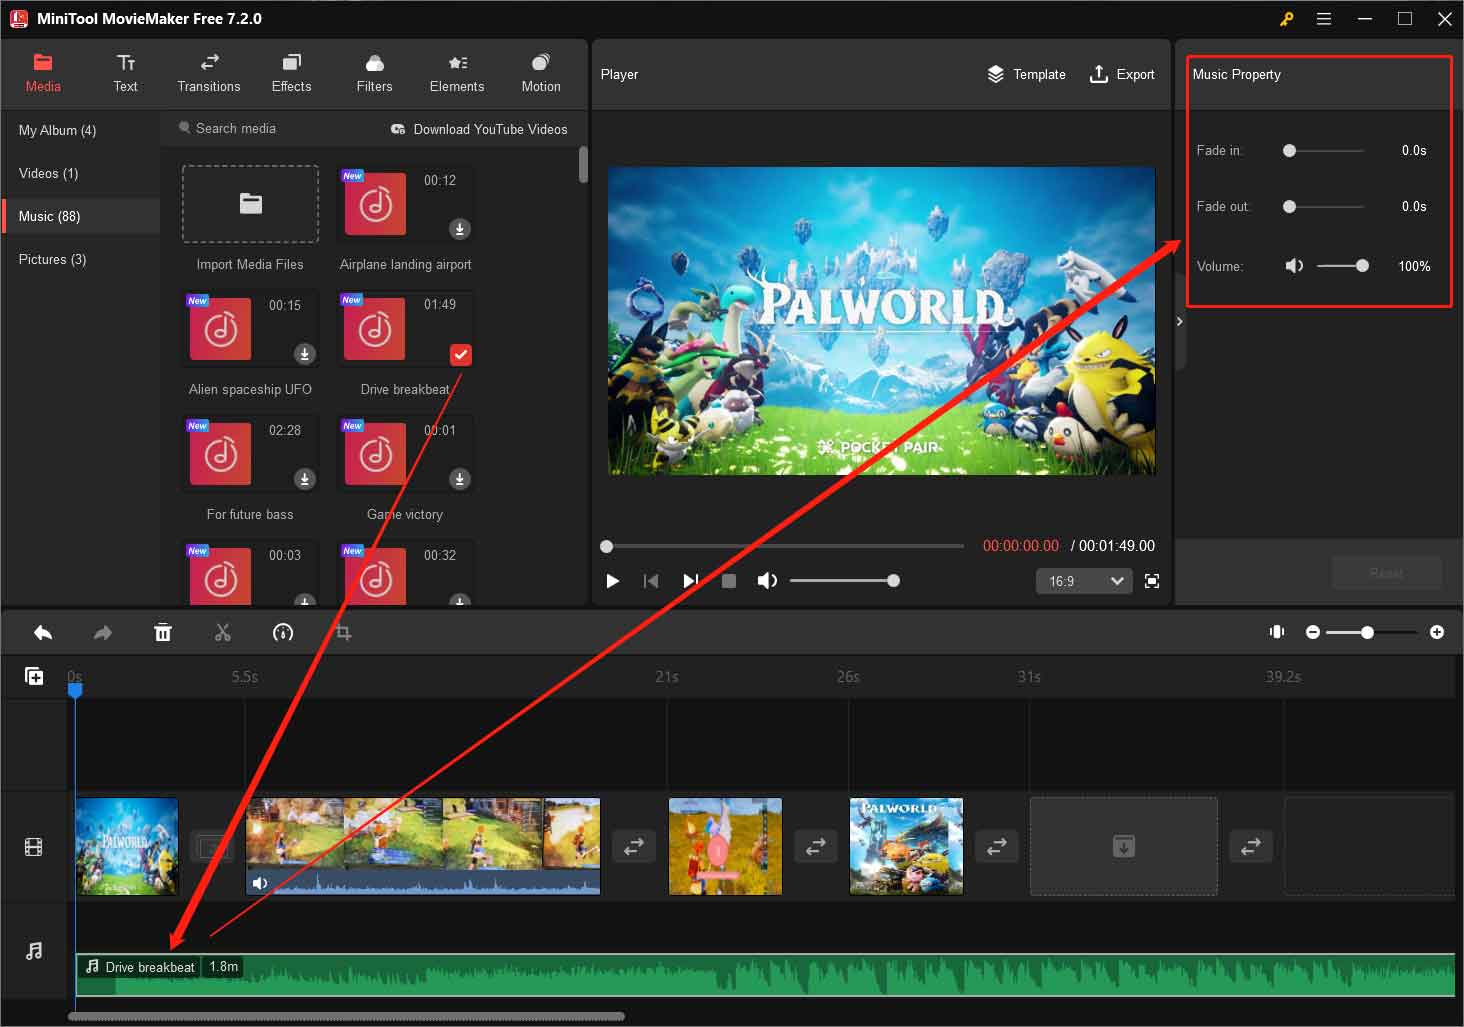 add and edit music into the Palworld video in MiniTool MovieMaker